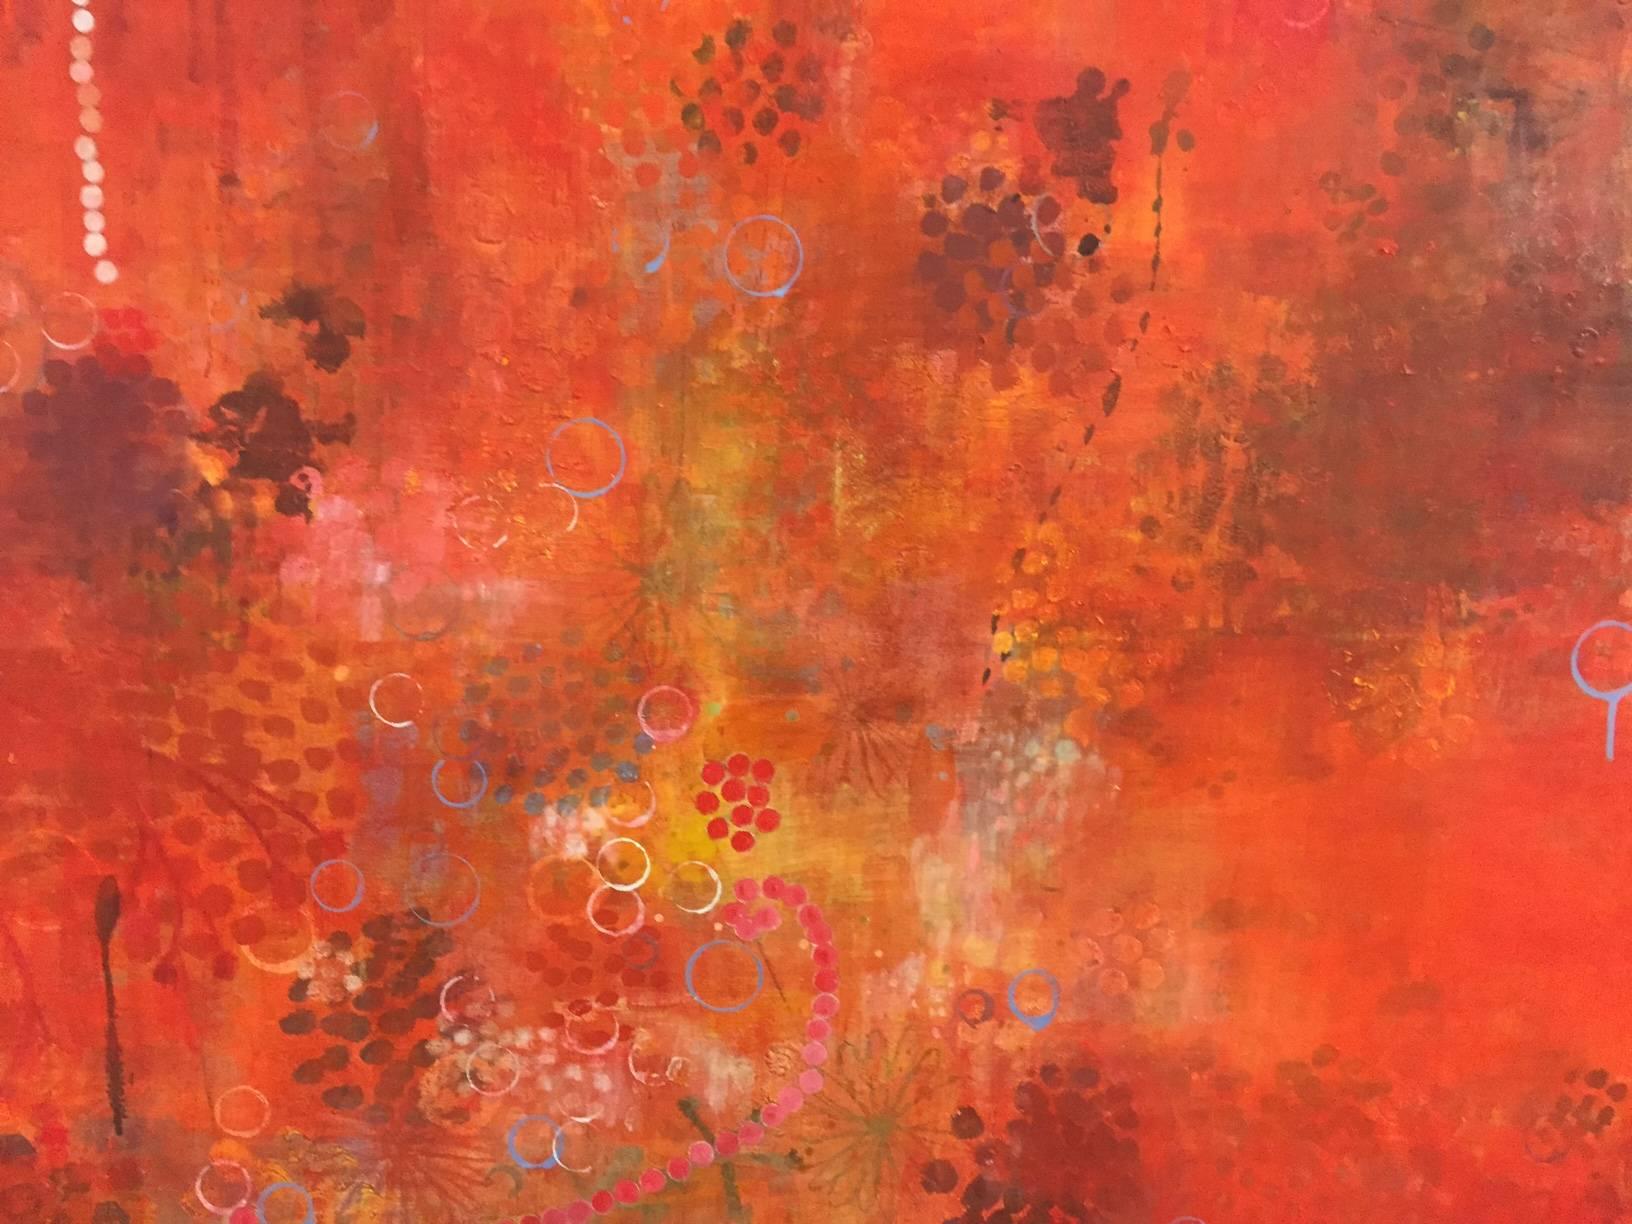 This beautiful red abstract painting is by Daru Jung Hyang Kim. Her Asian inspired work integrates the two aspects of her aesthetic and sensibility into one composition. She merges culture and nature, merging East and West, the traditional and the